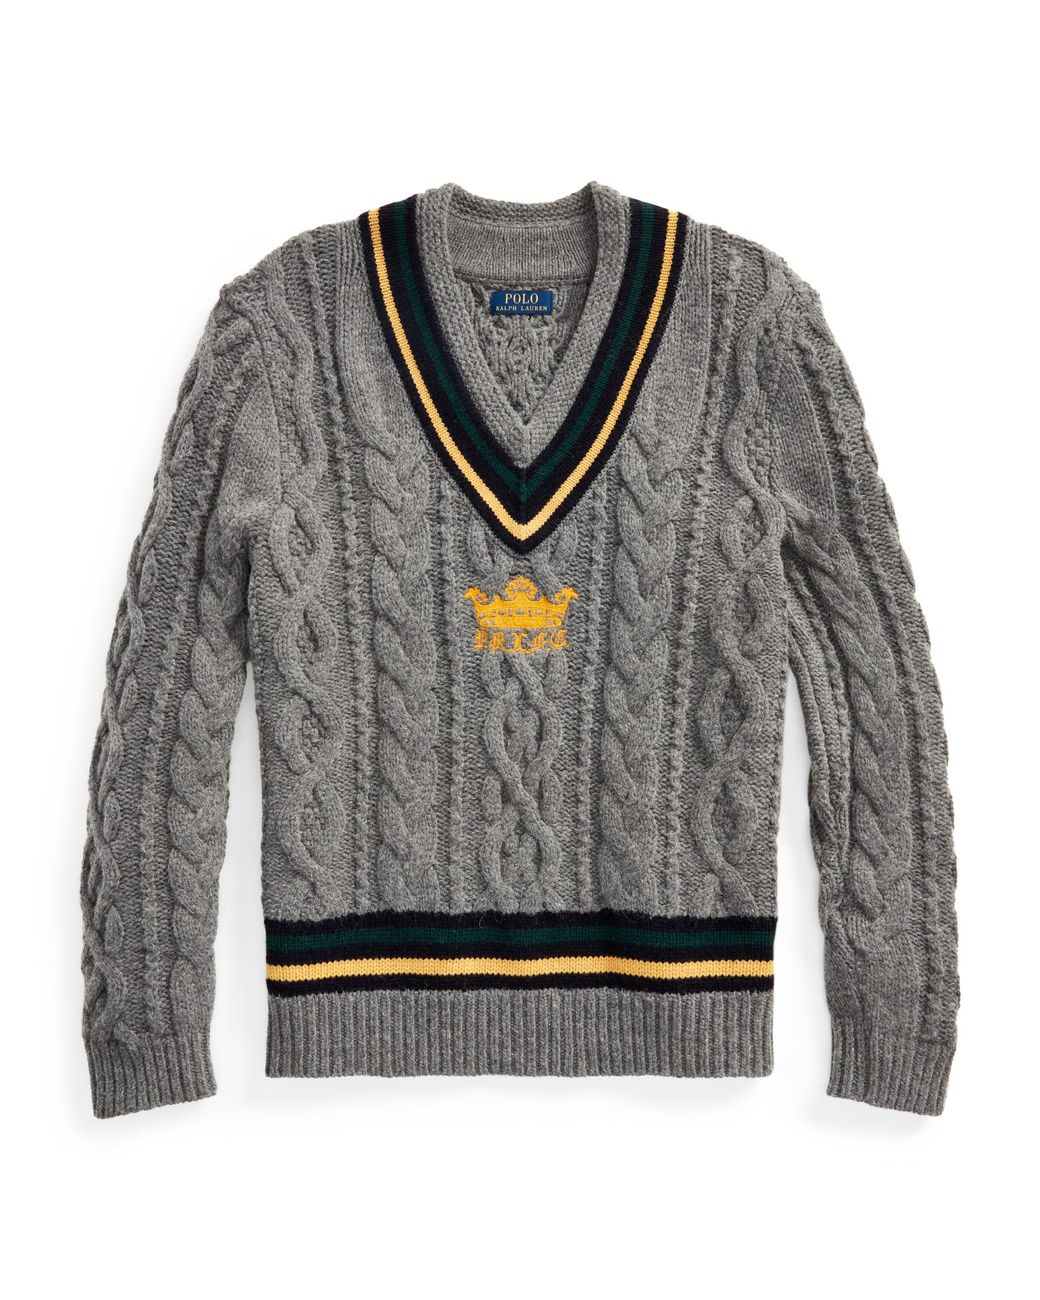 Polo Ralph Lauren Embroidered Cricket Jumper in Gray for Men | Lyst